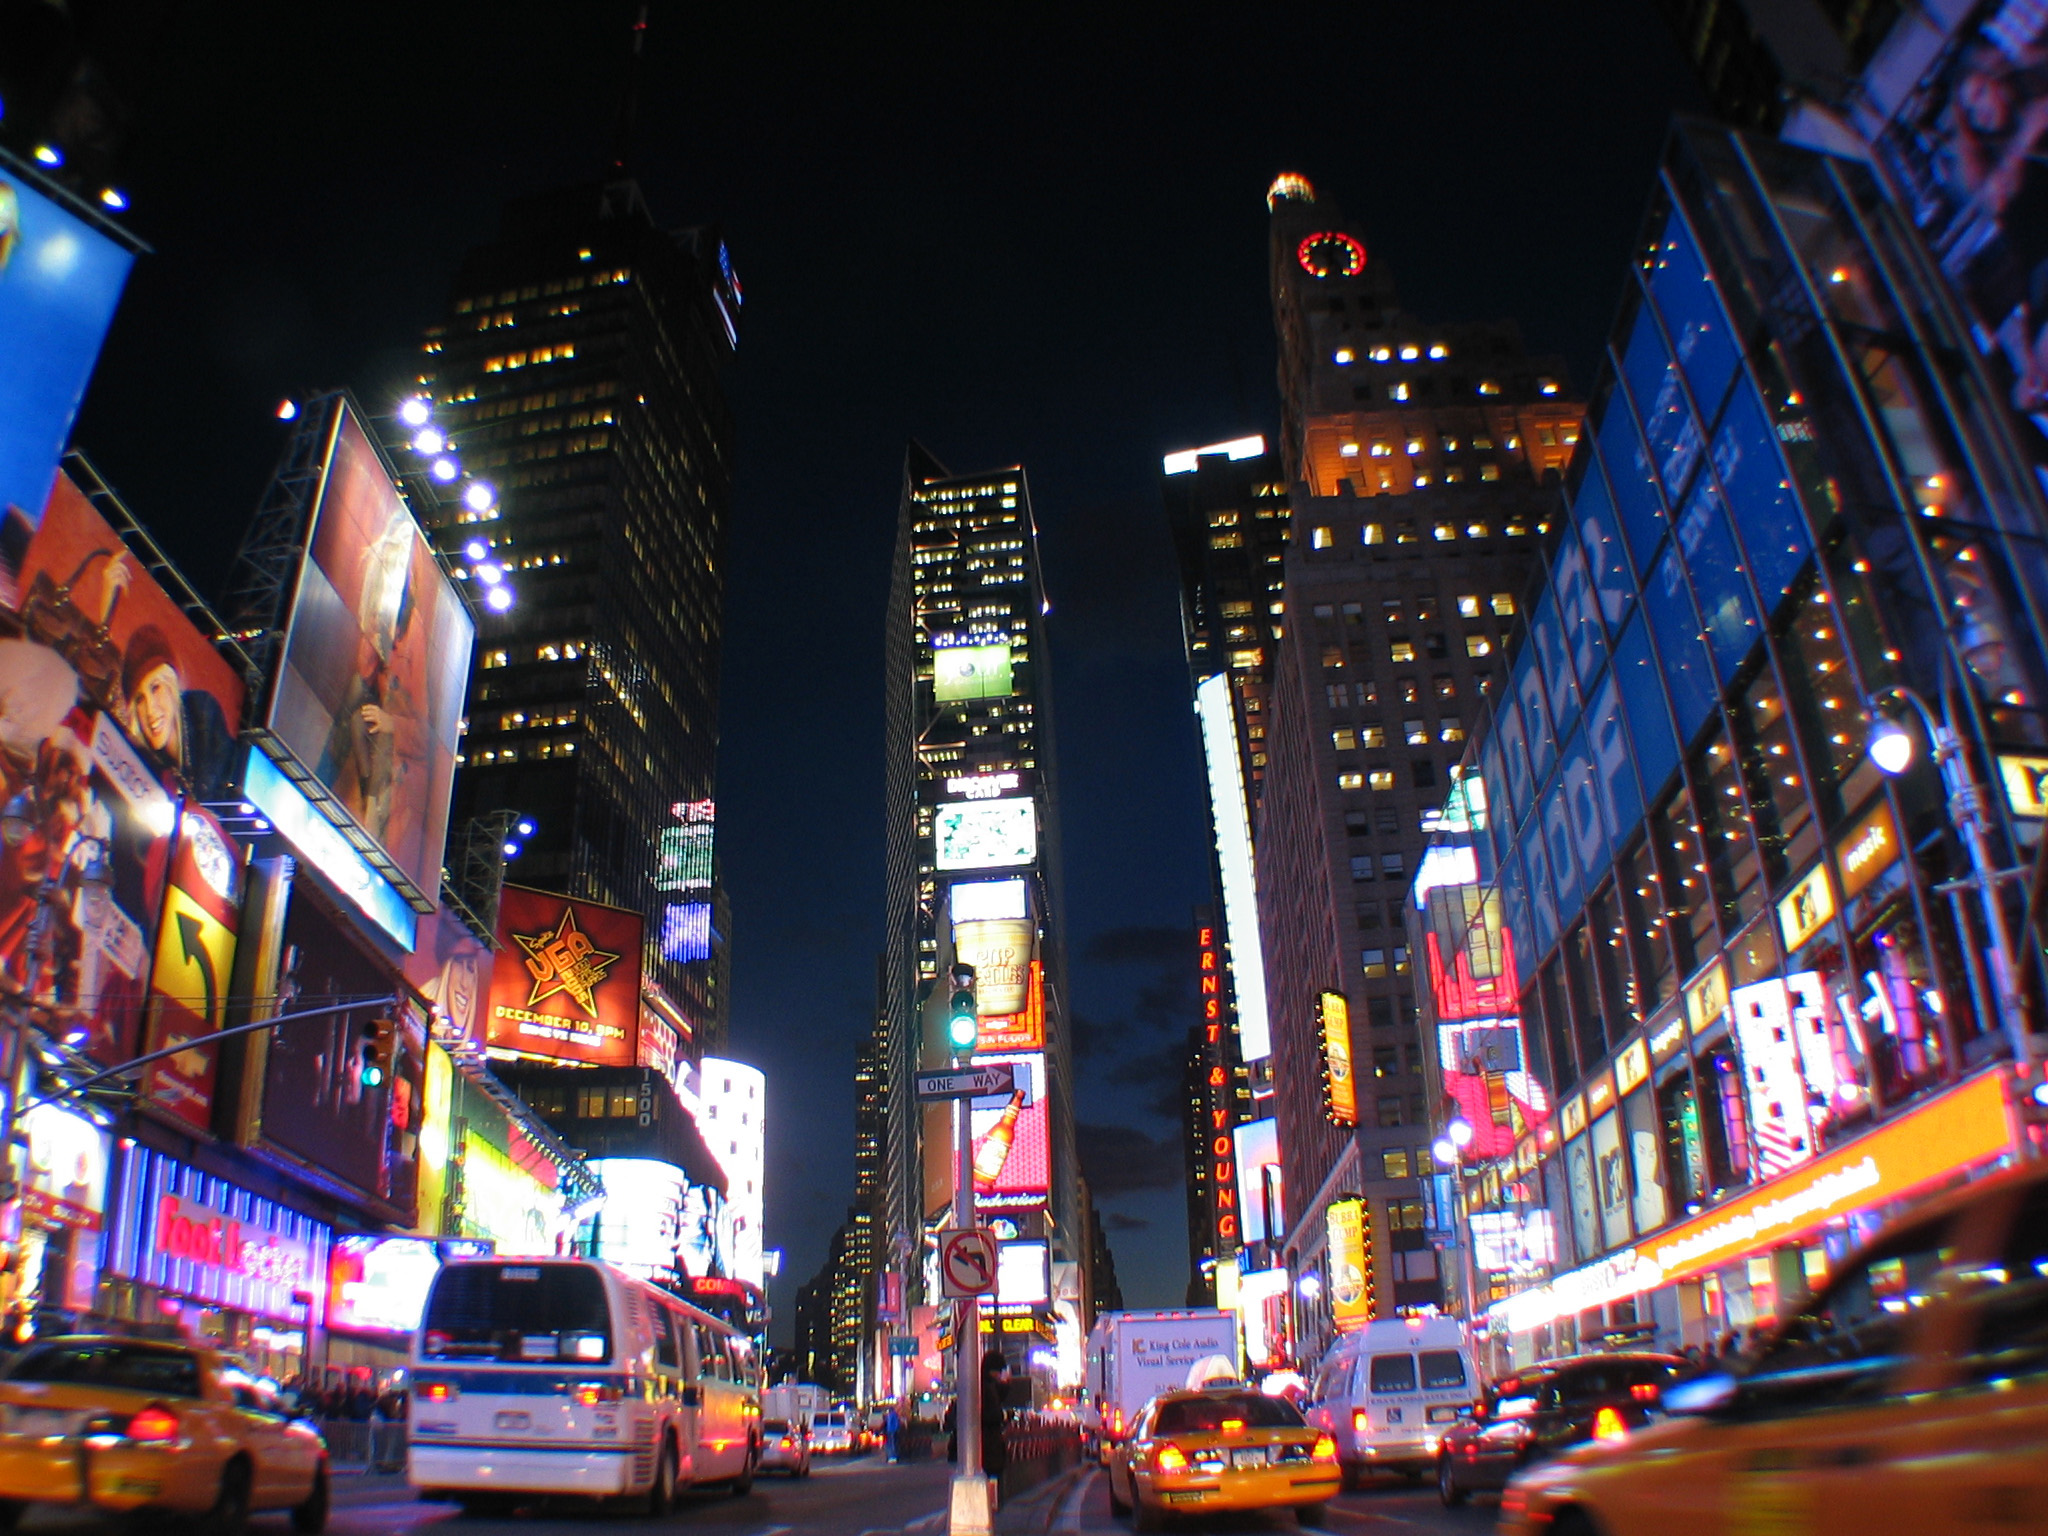 New York At Night Images Wallpapers : City Wallpaper - LocaLwom